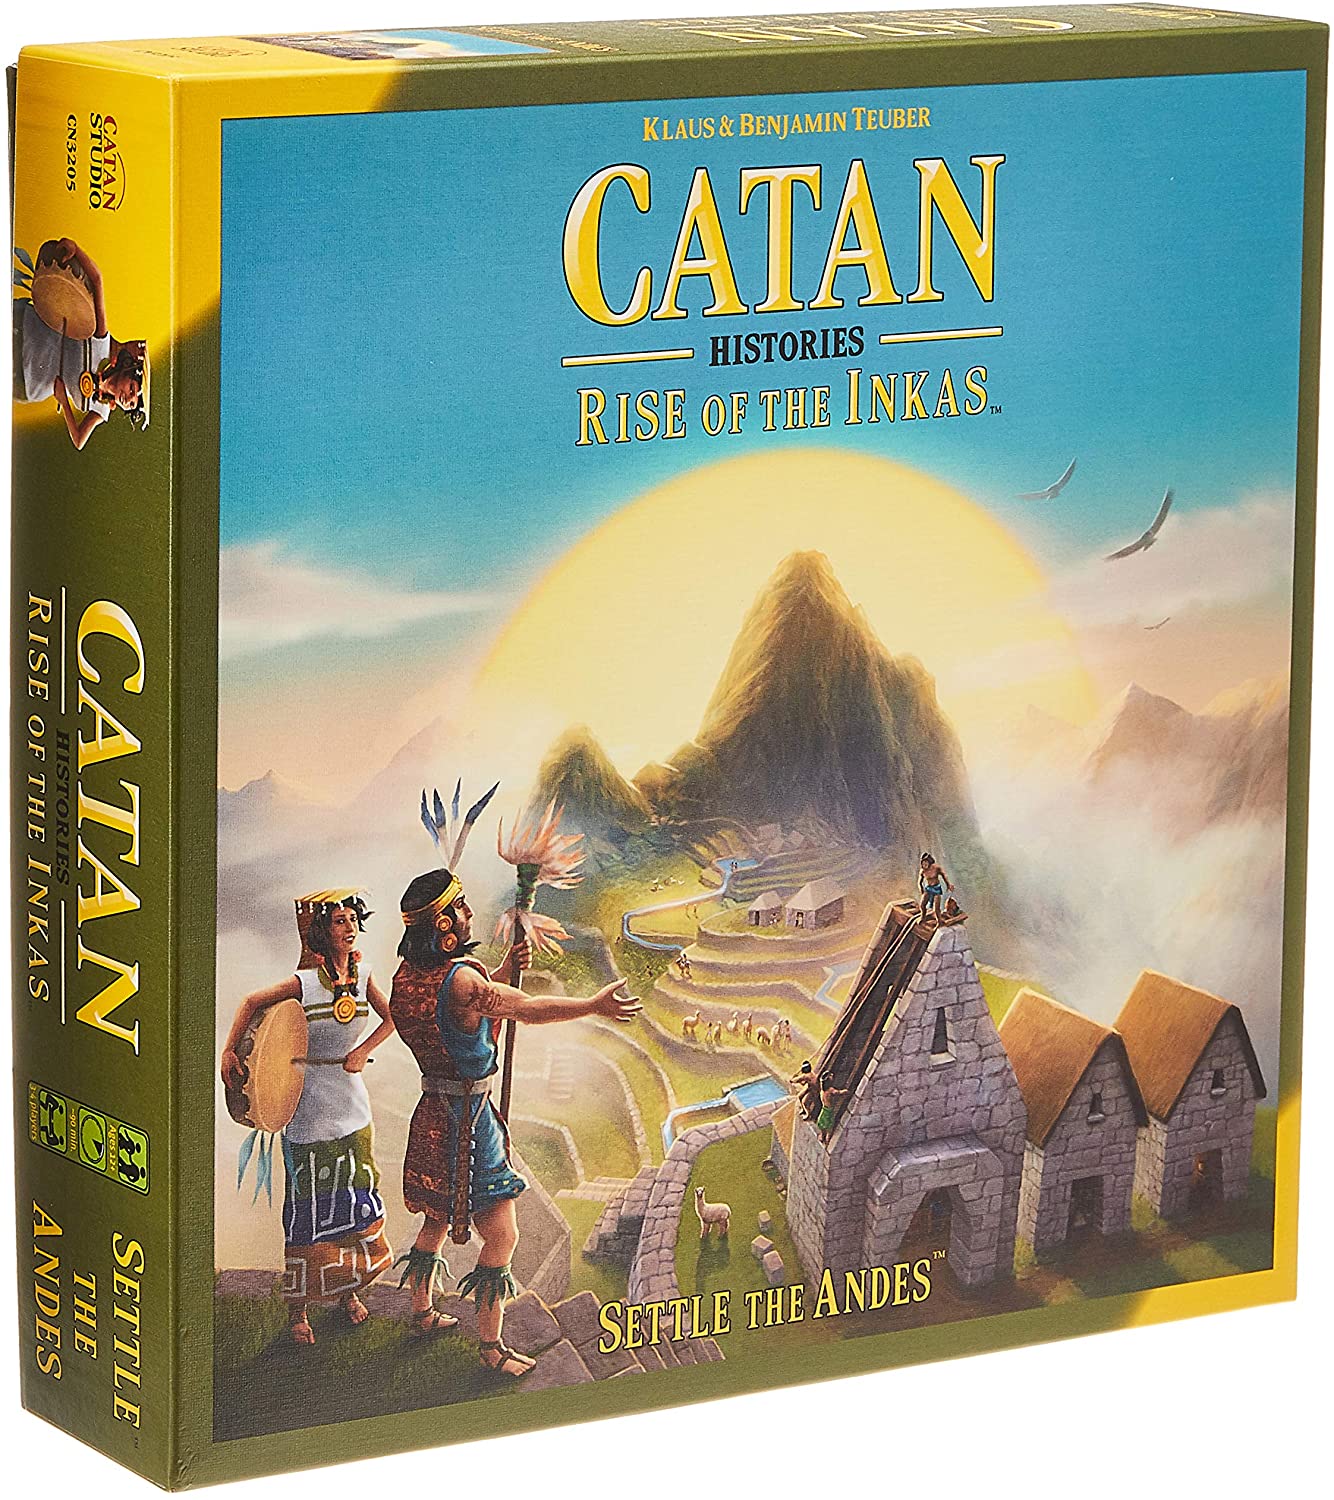 RISE OF THE INKAS CATAN HISTORIES